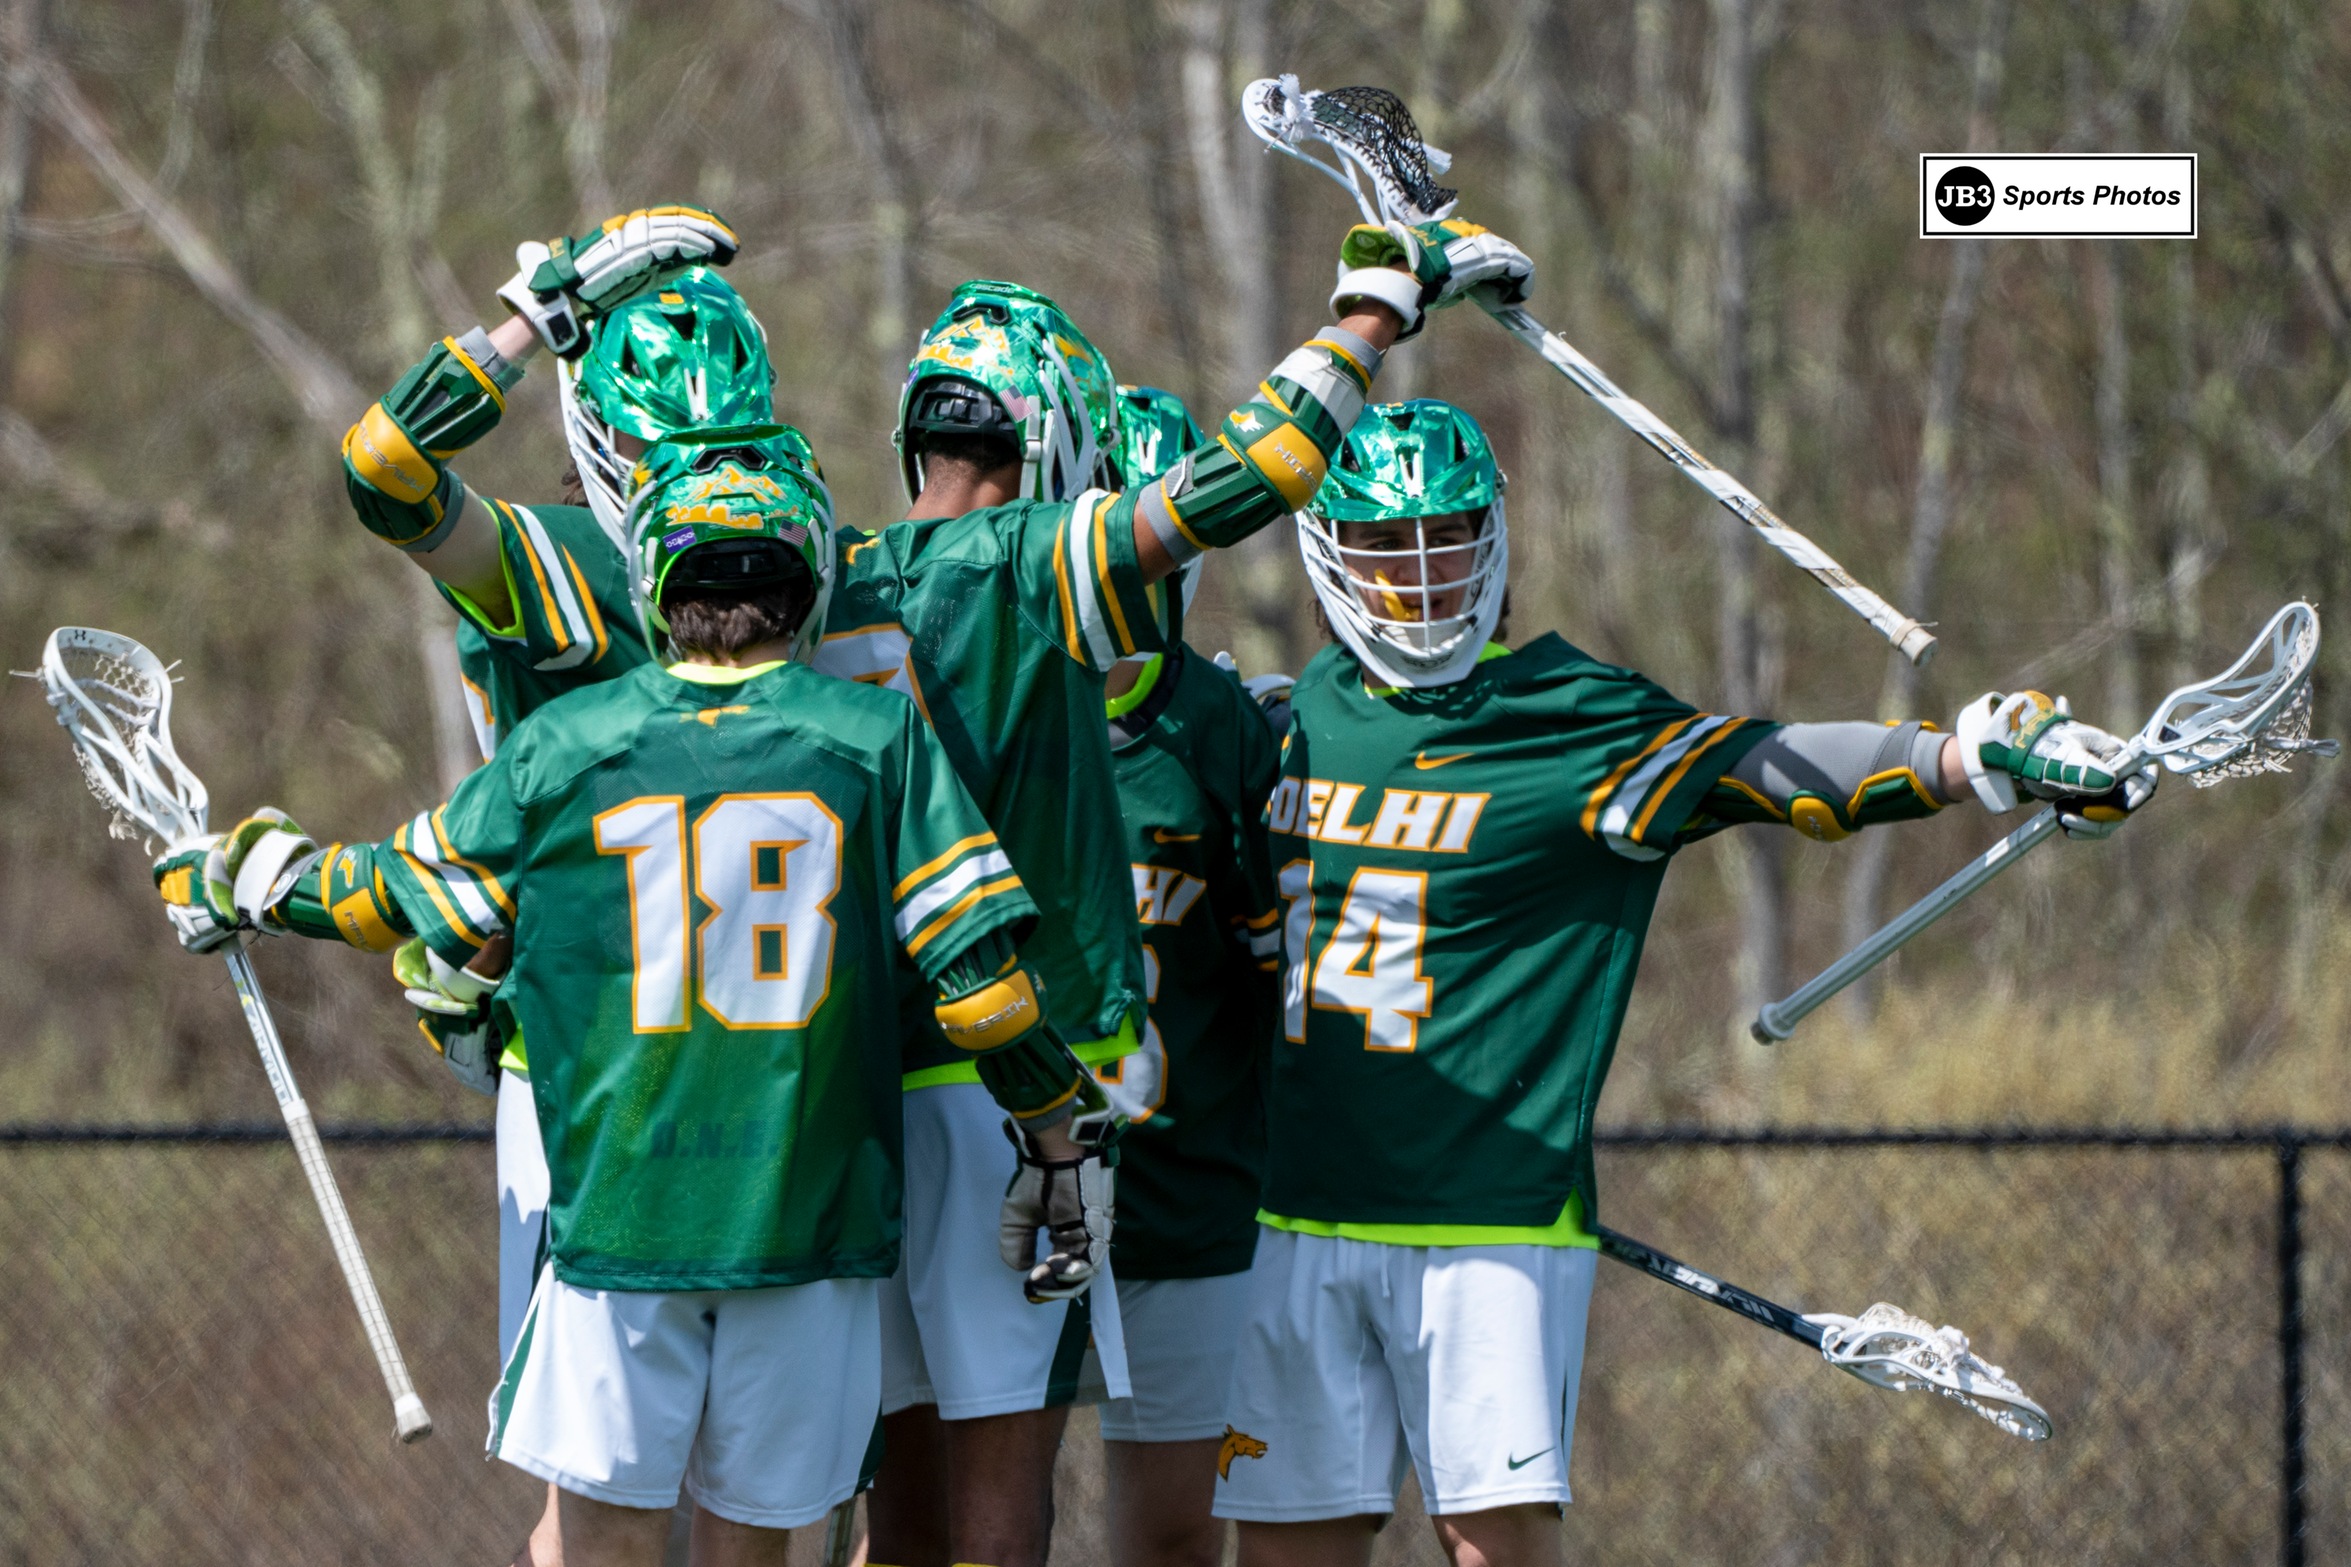 Men's Lacrosse wins first ever NAC playoff game in 9-6 defeat of No. 2 SUNY Poly